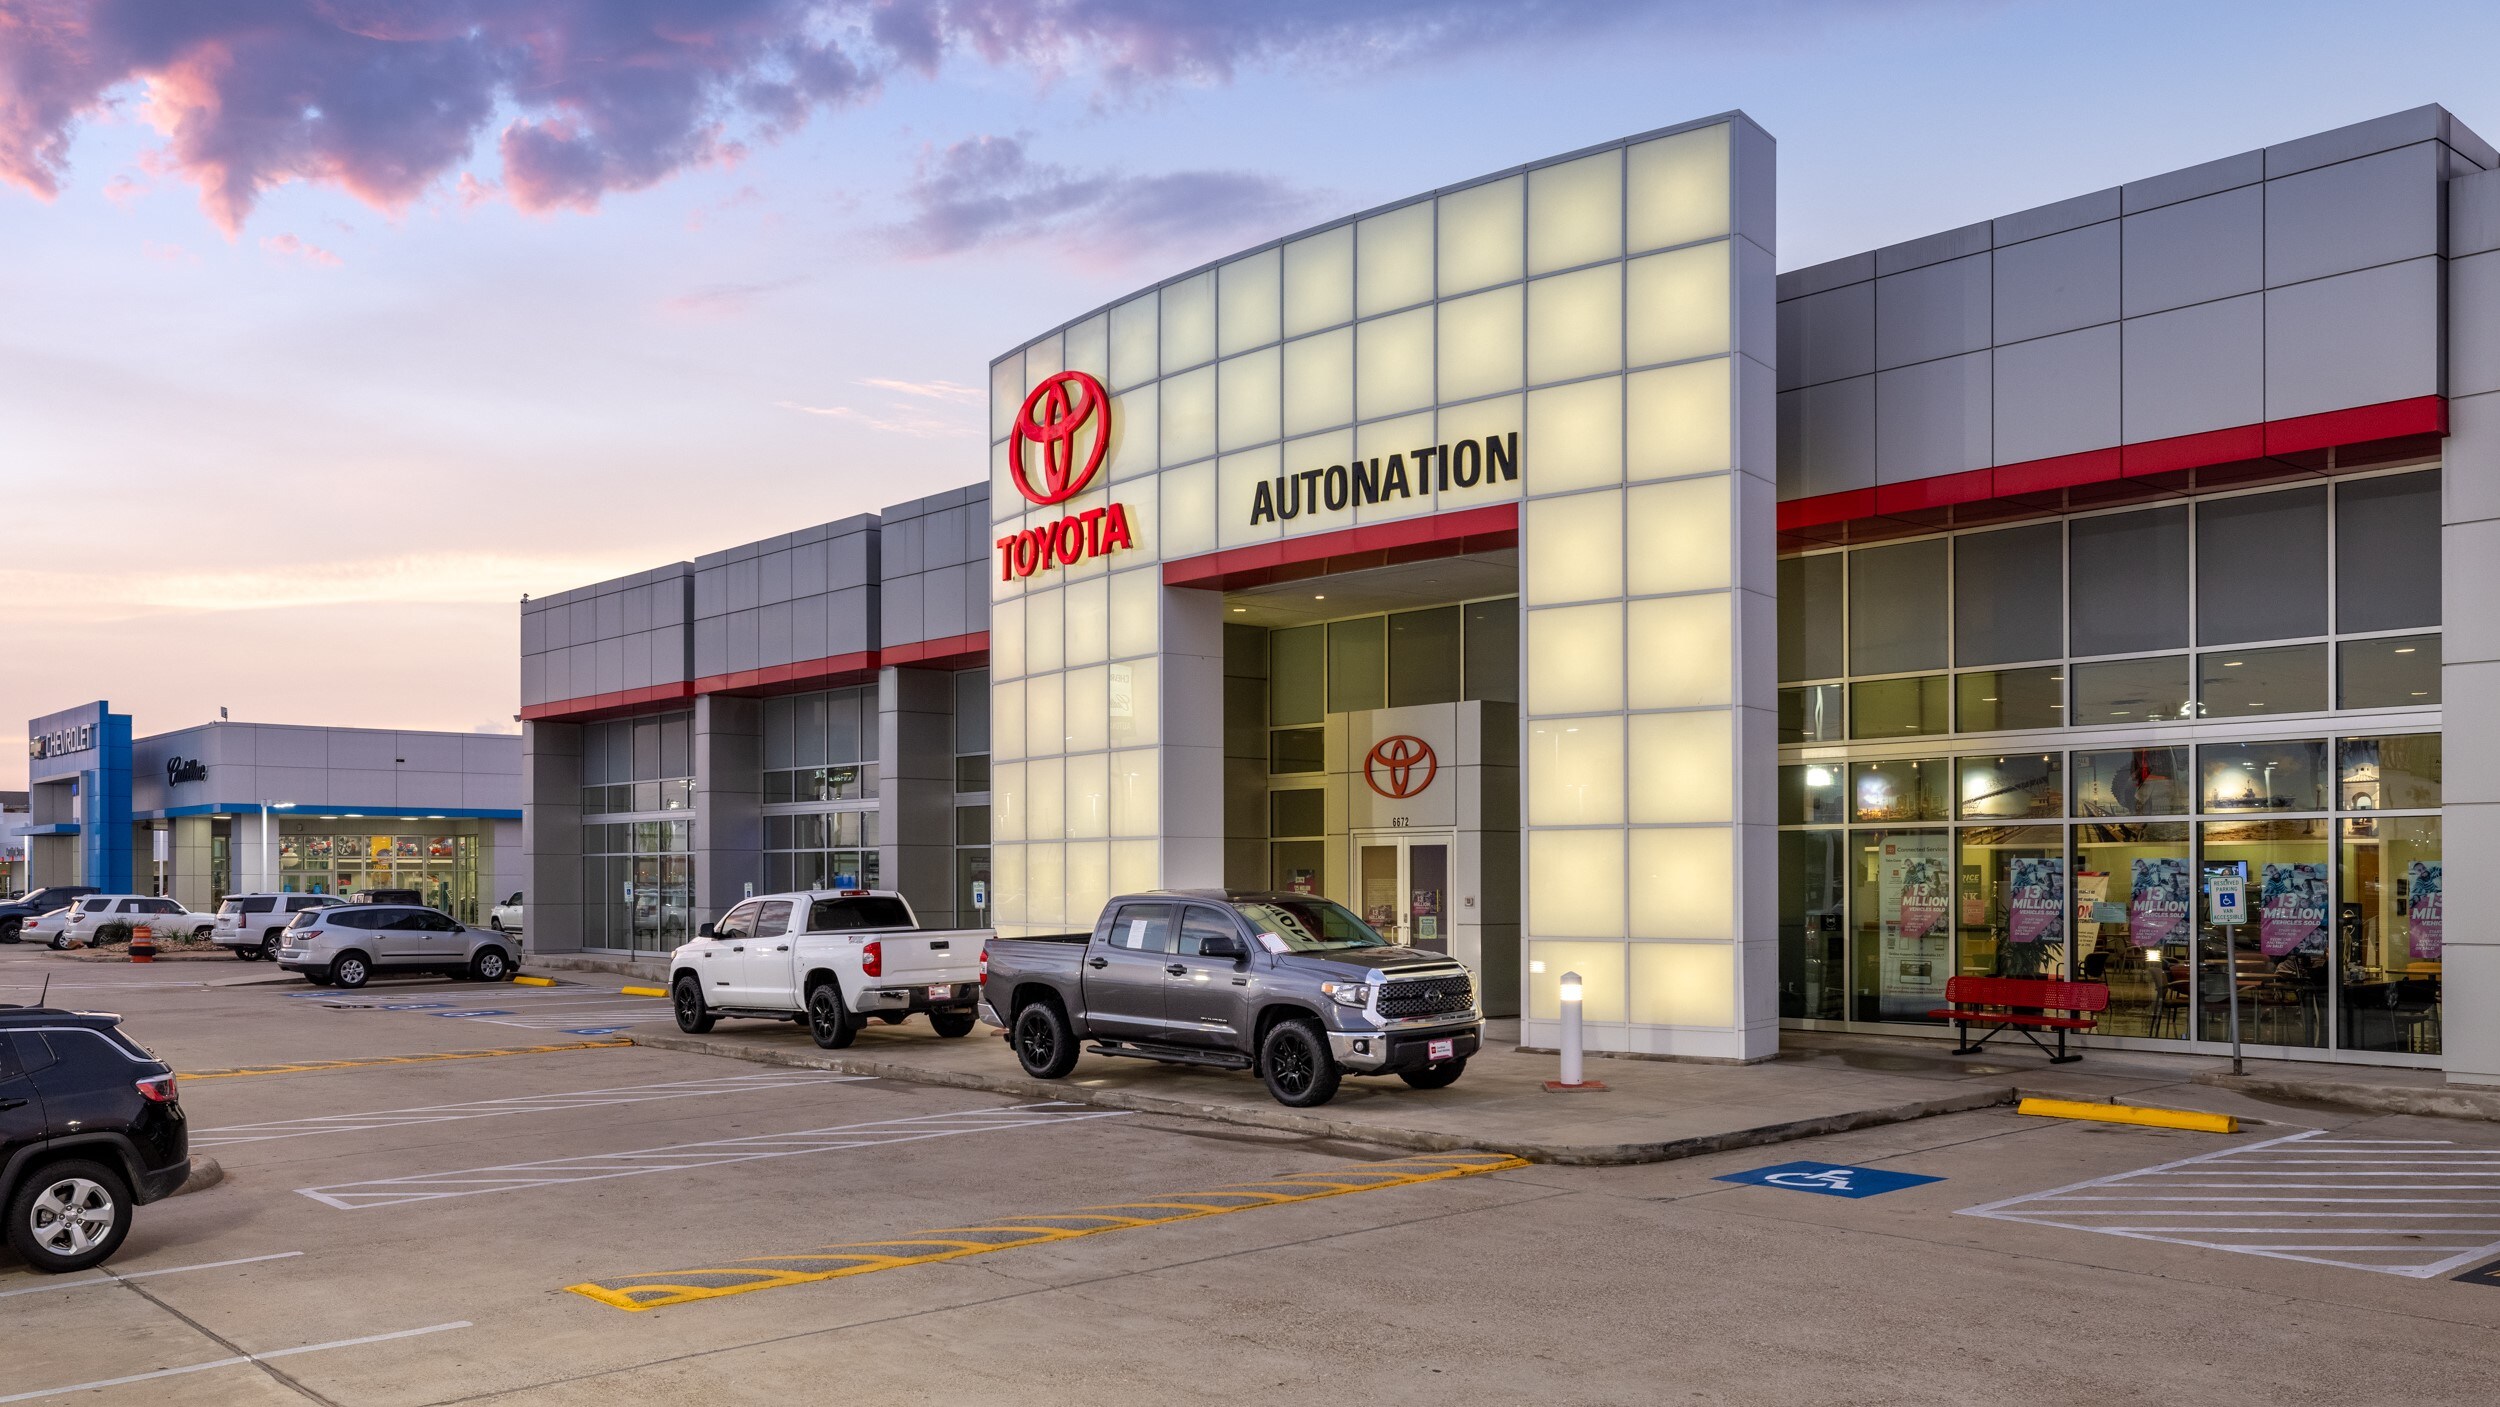 Exterior view of AutoNation Toyota Corpus Christi, with a partly cloudy blue sky. The building is grey, and part of the face is illuminated. Several vehicles can be seen parked near the vehicle.